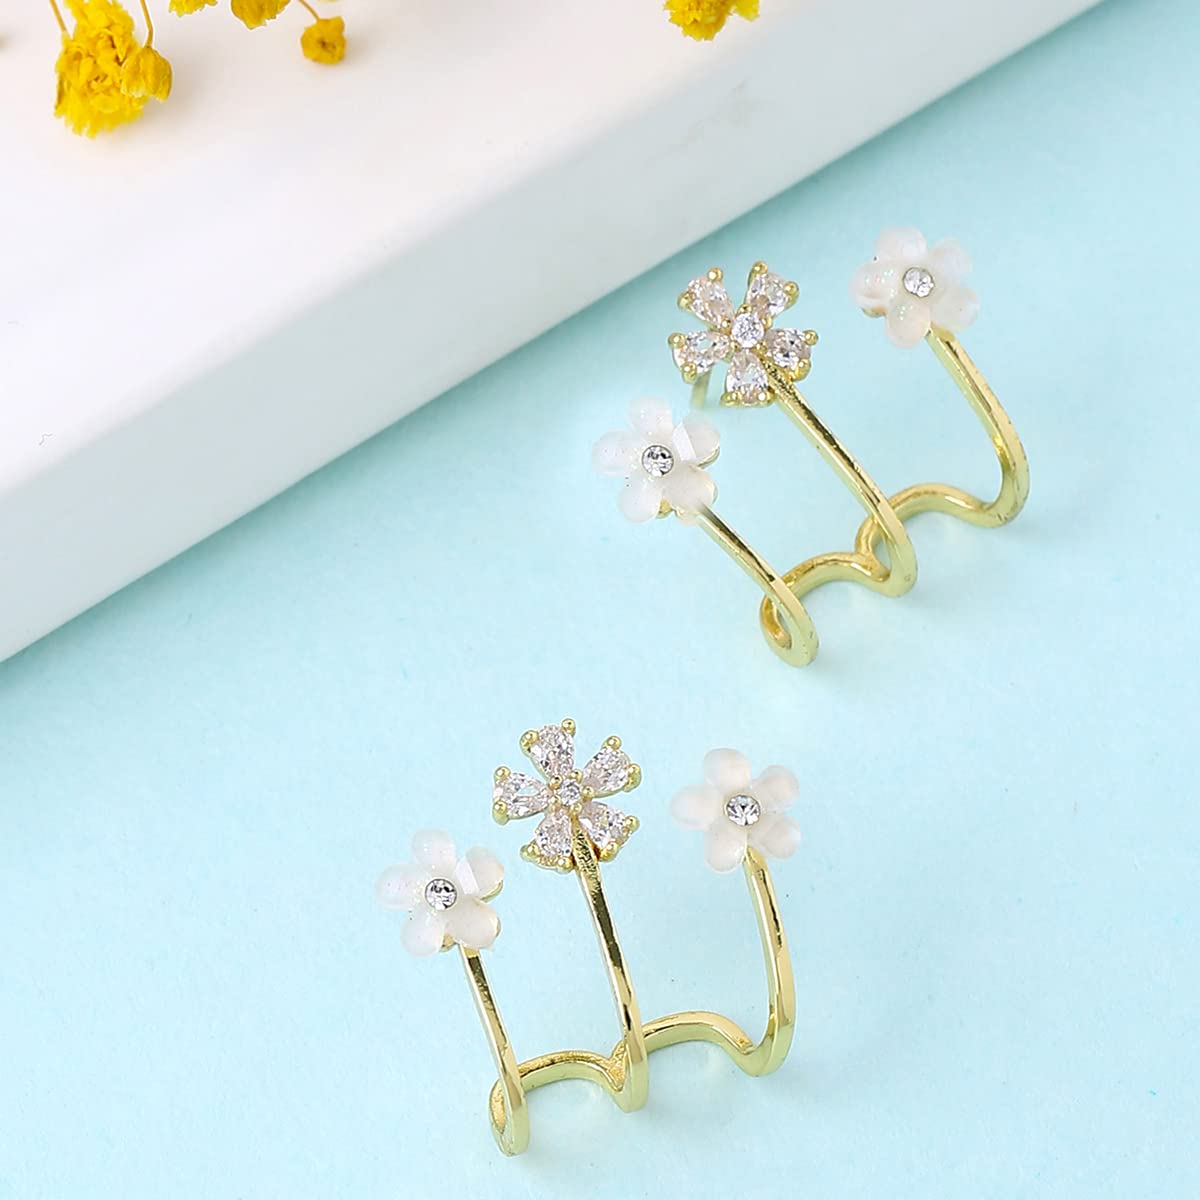 Yellow Chimes Earrings For Women Gold Tone Crystal Studded Triple Flower Stud Clip On Earrings For Women and Girls